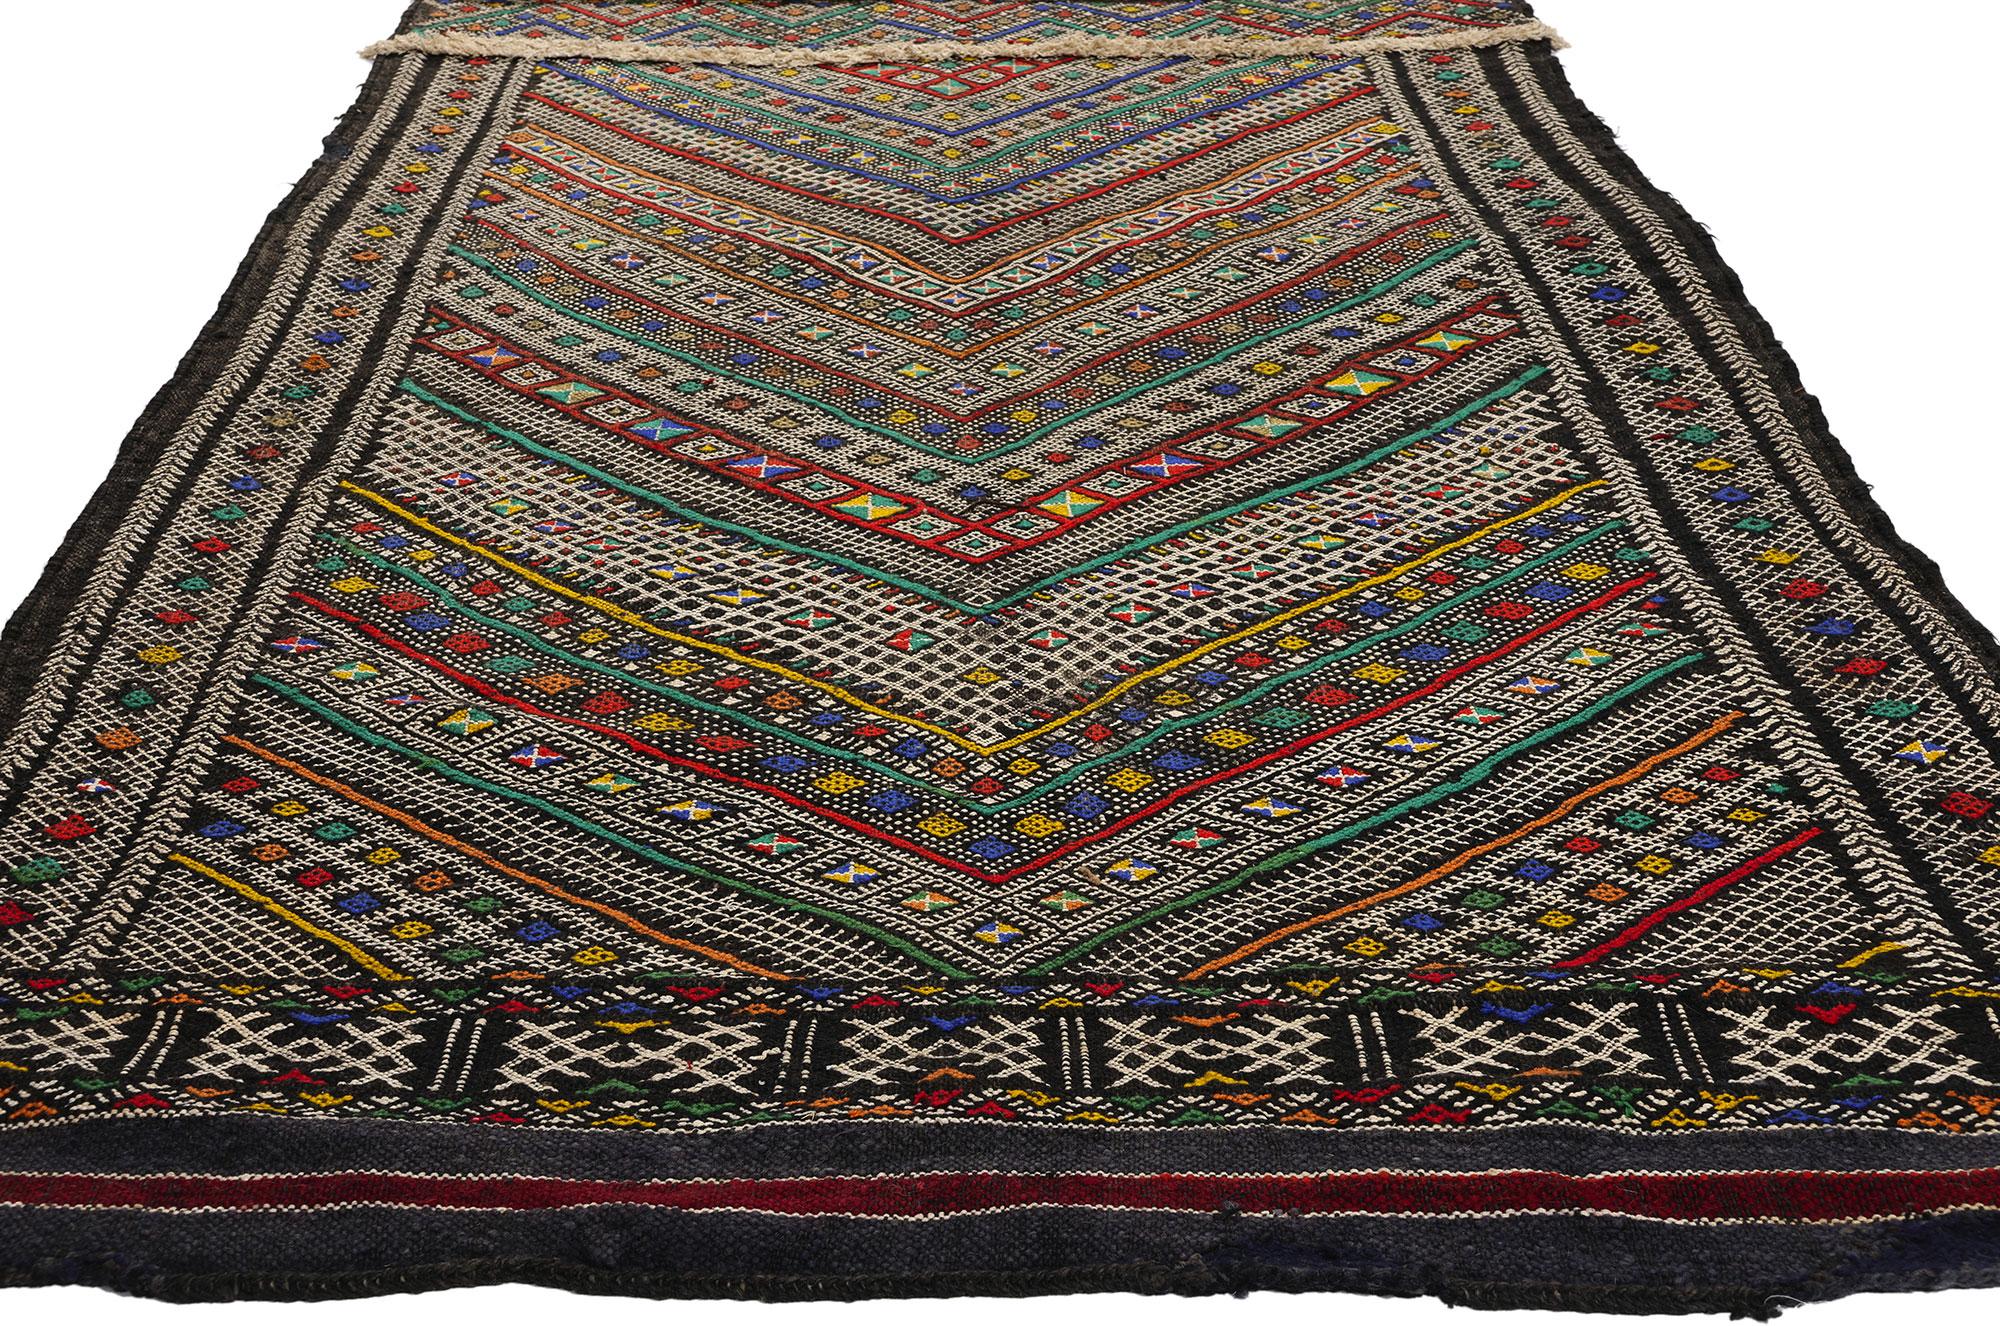 21847 Vintage Zemmour Moroccan Kilim Rug, 03'09 x 20'01. Introducing this bohemian-inspired extra-long handwoven wool Moroccan kilim rug runner, a masterpiece created by the skilled artisans of the Zemmour Tribe nestled in the Middle Atlas Mountains